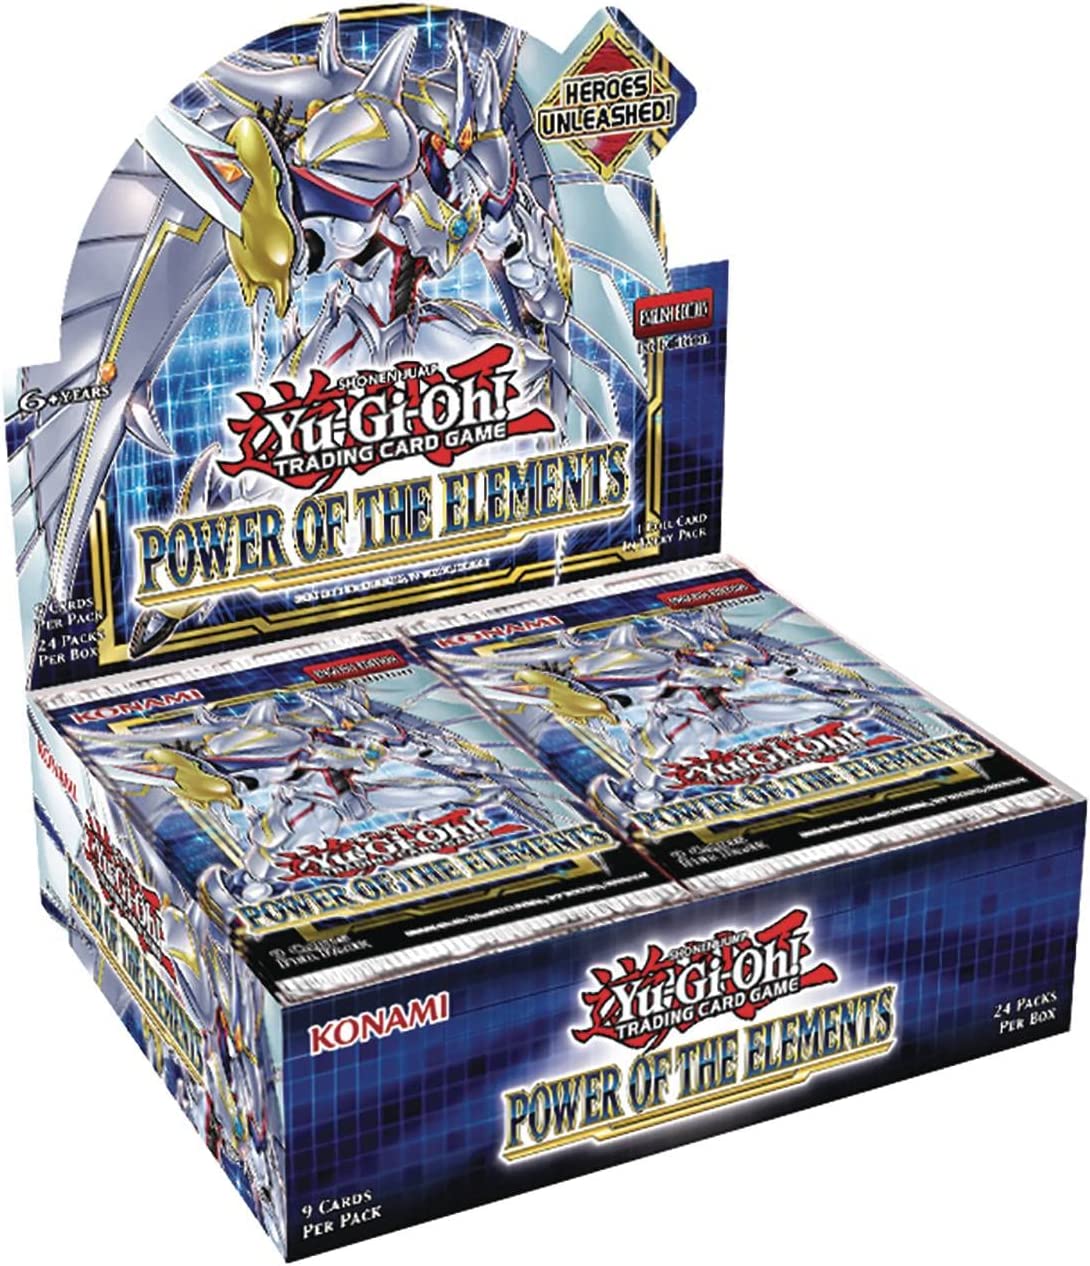 Yu-Gi-Oh! Booster Box Case - Power of the Elements (Unlimited) (Case of 12)